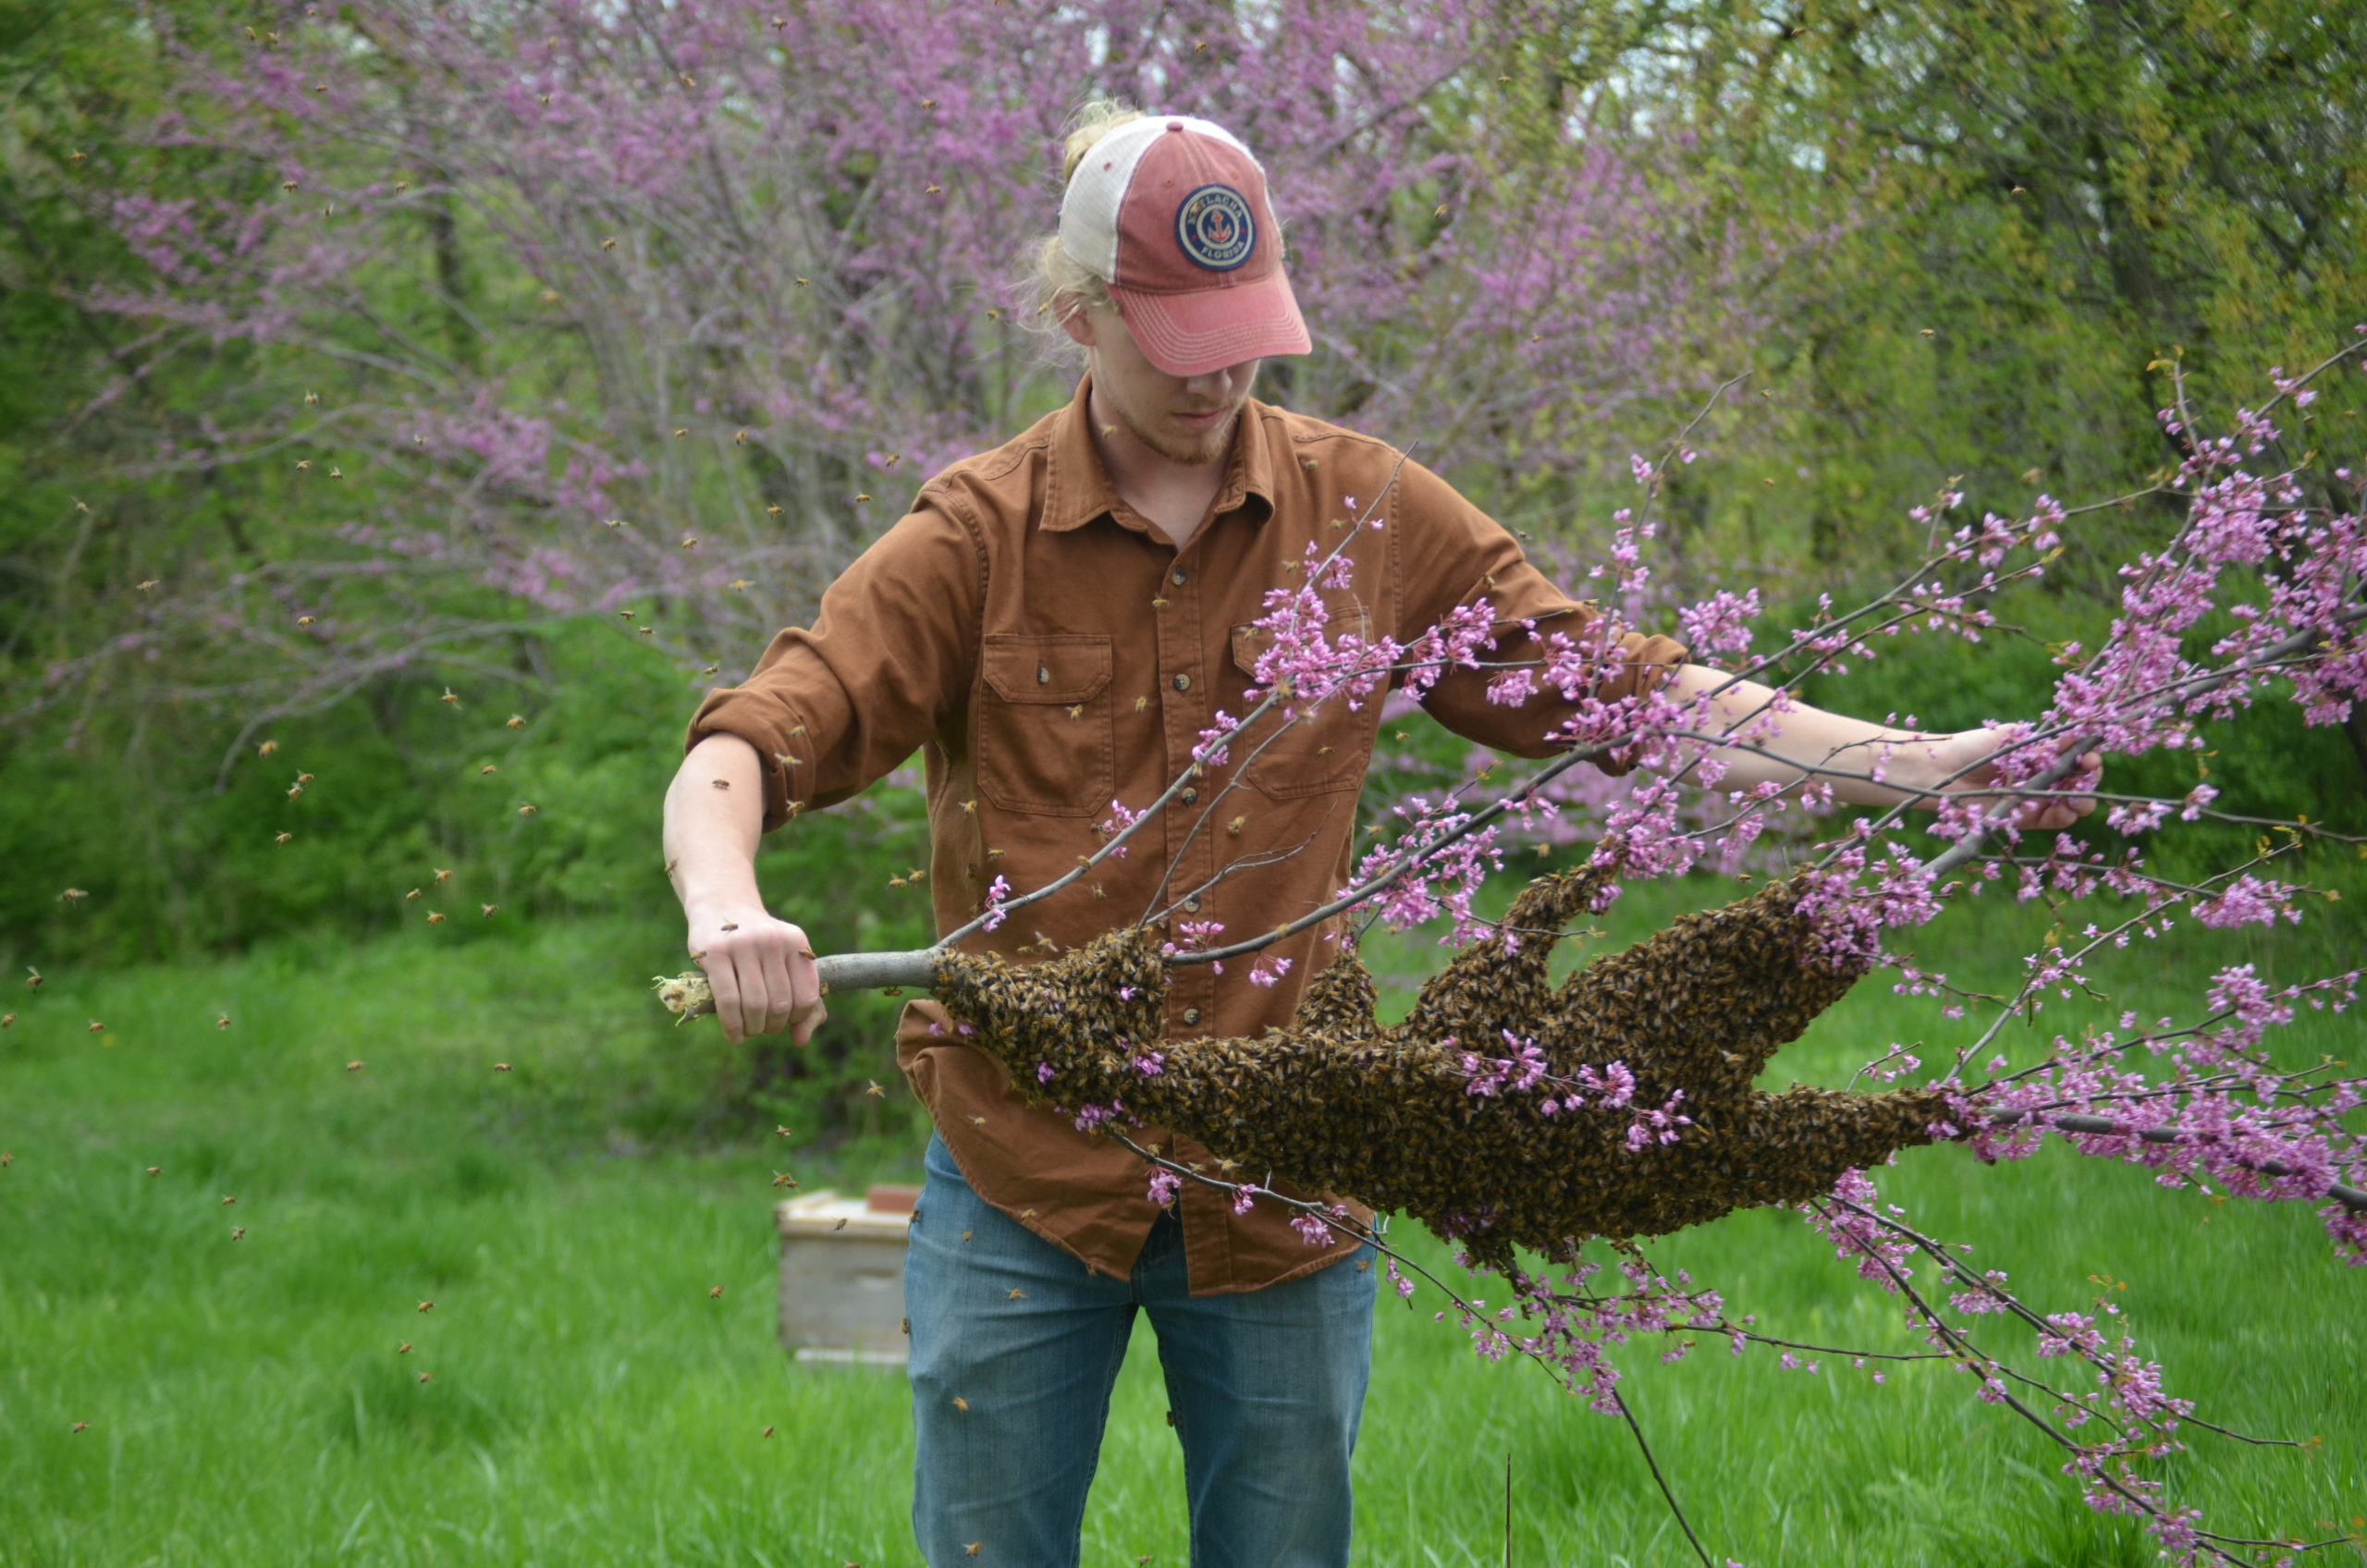 Bee Program worker, Dade Bradley, holds Branch with a swarm of bees with the intent to save them.